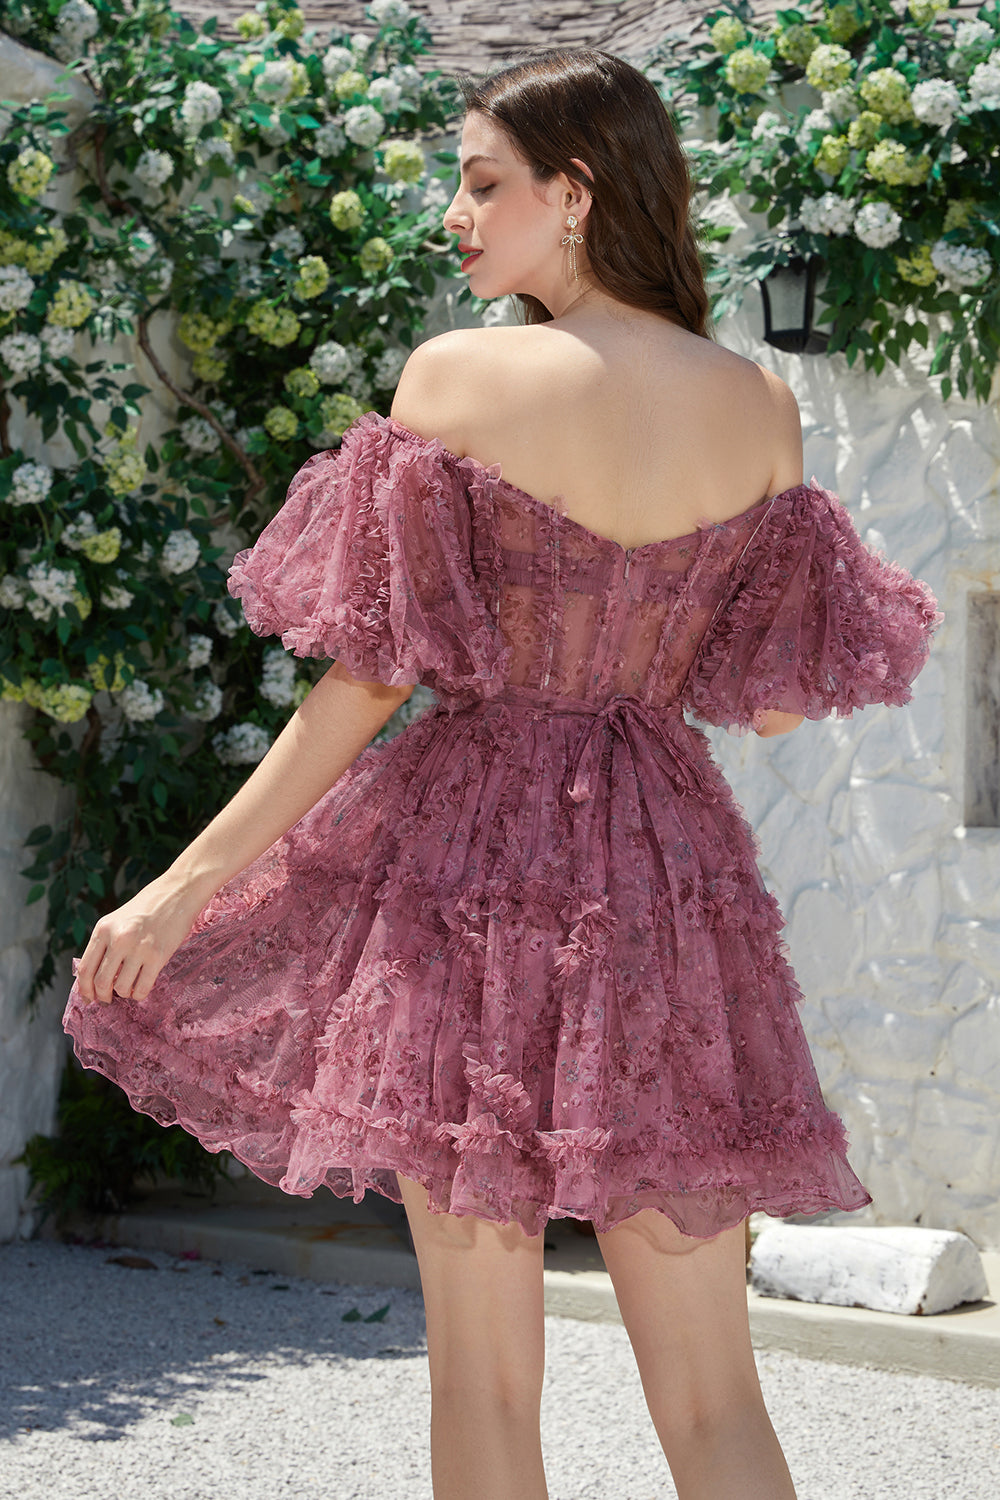 Beautiful A Line Off the Shoulder Dusty Rose Tulle Short Homecoming Dress with Short Sleeves